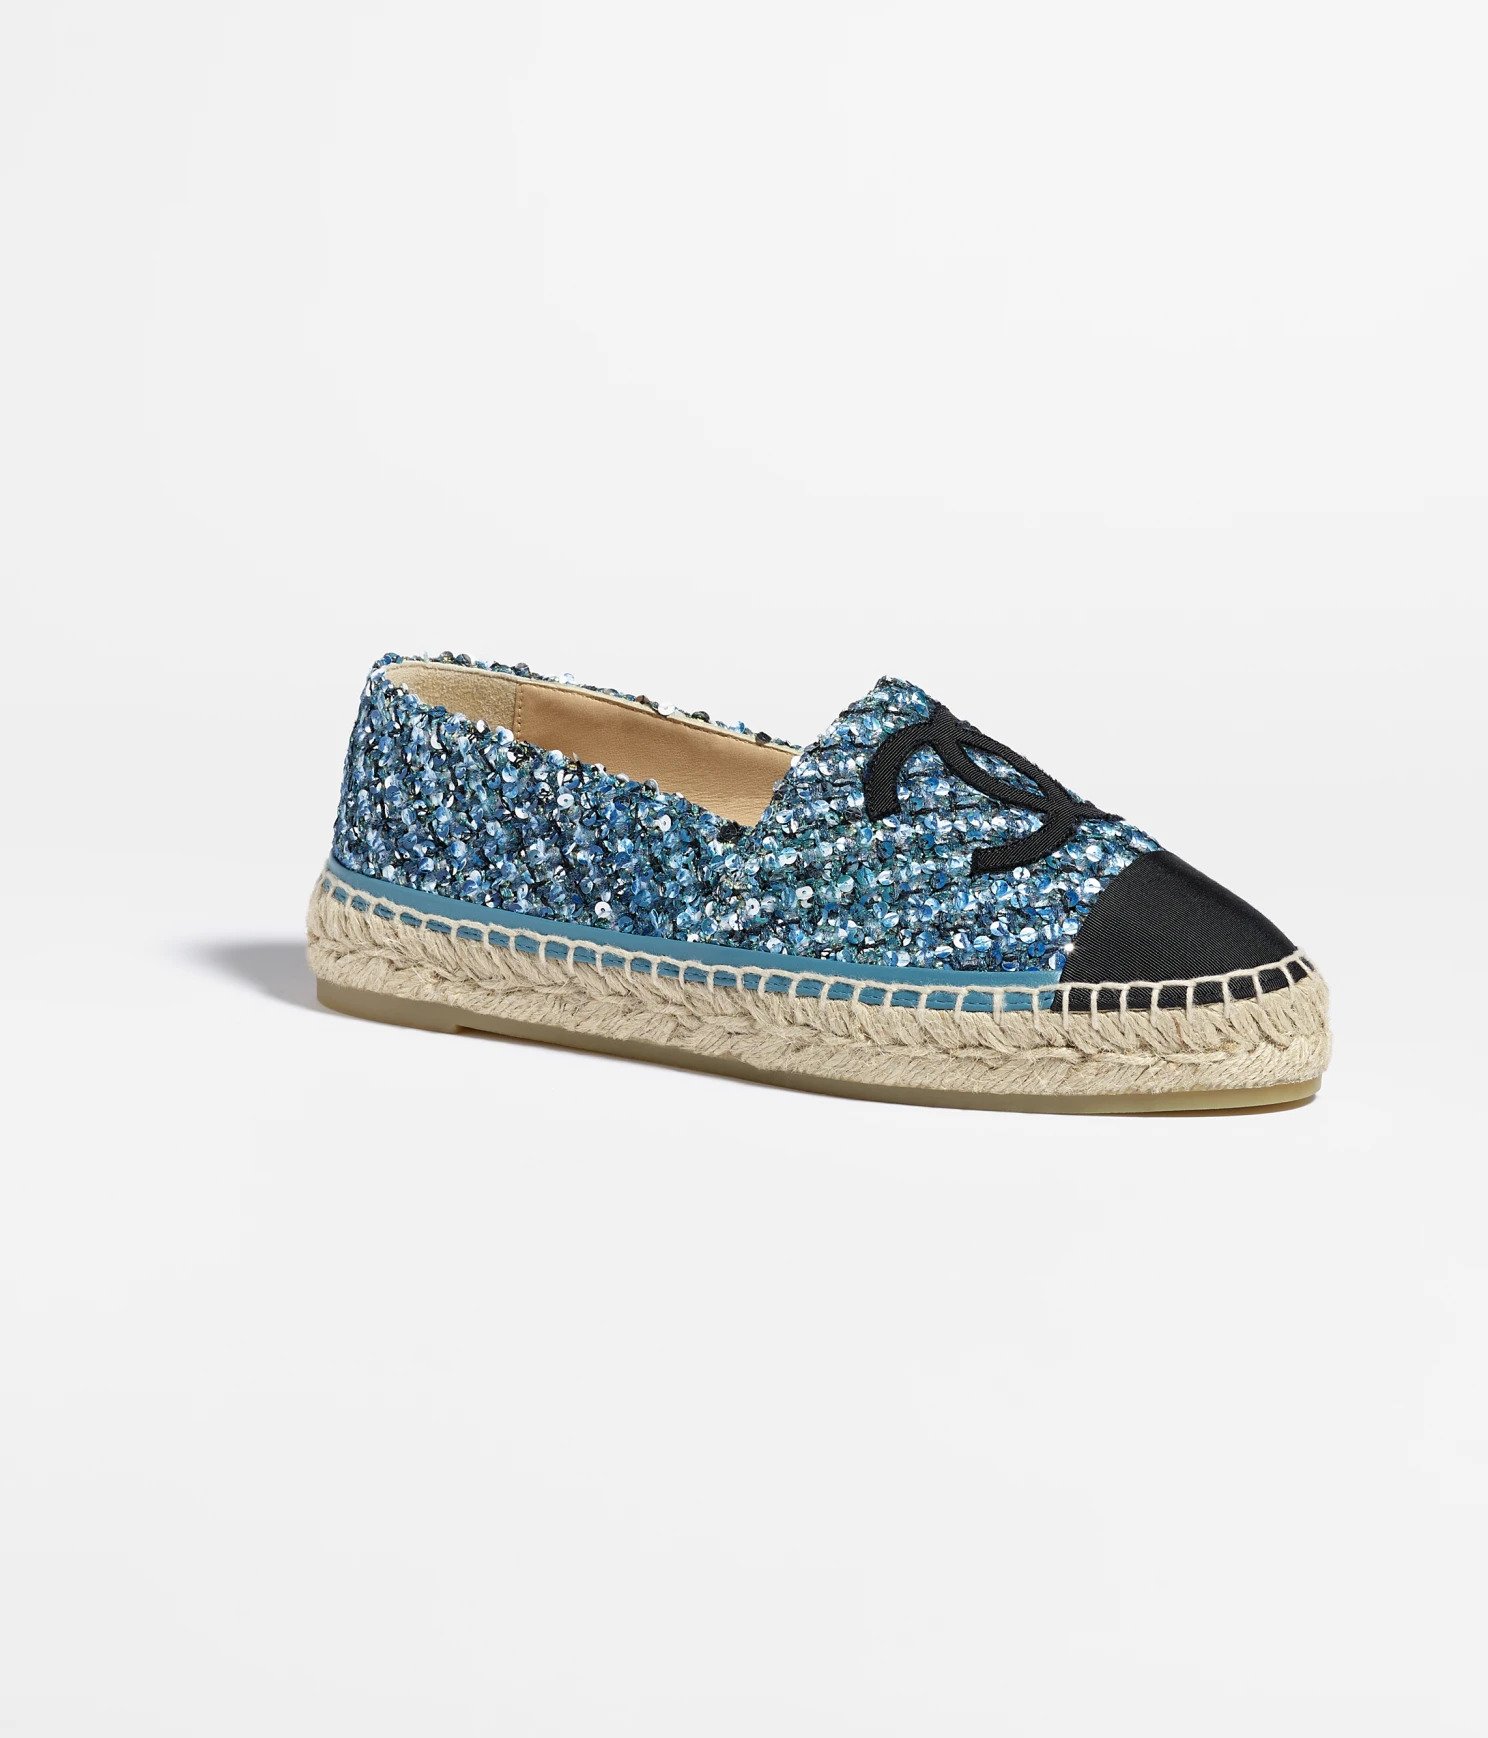 Fashion People Love Chanel Espadrilles—Here’s the Reason | Who What Wear UK